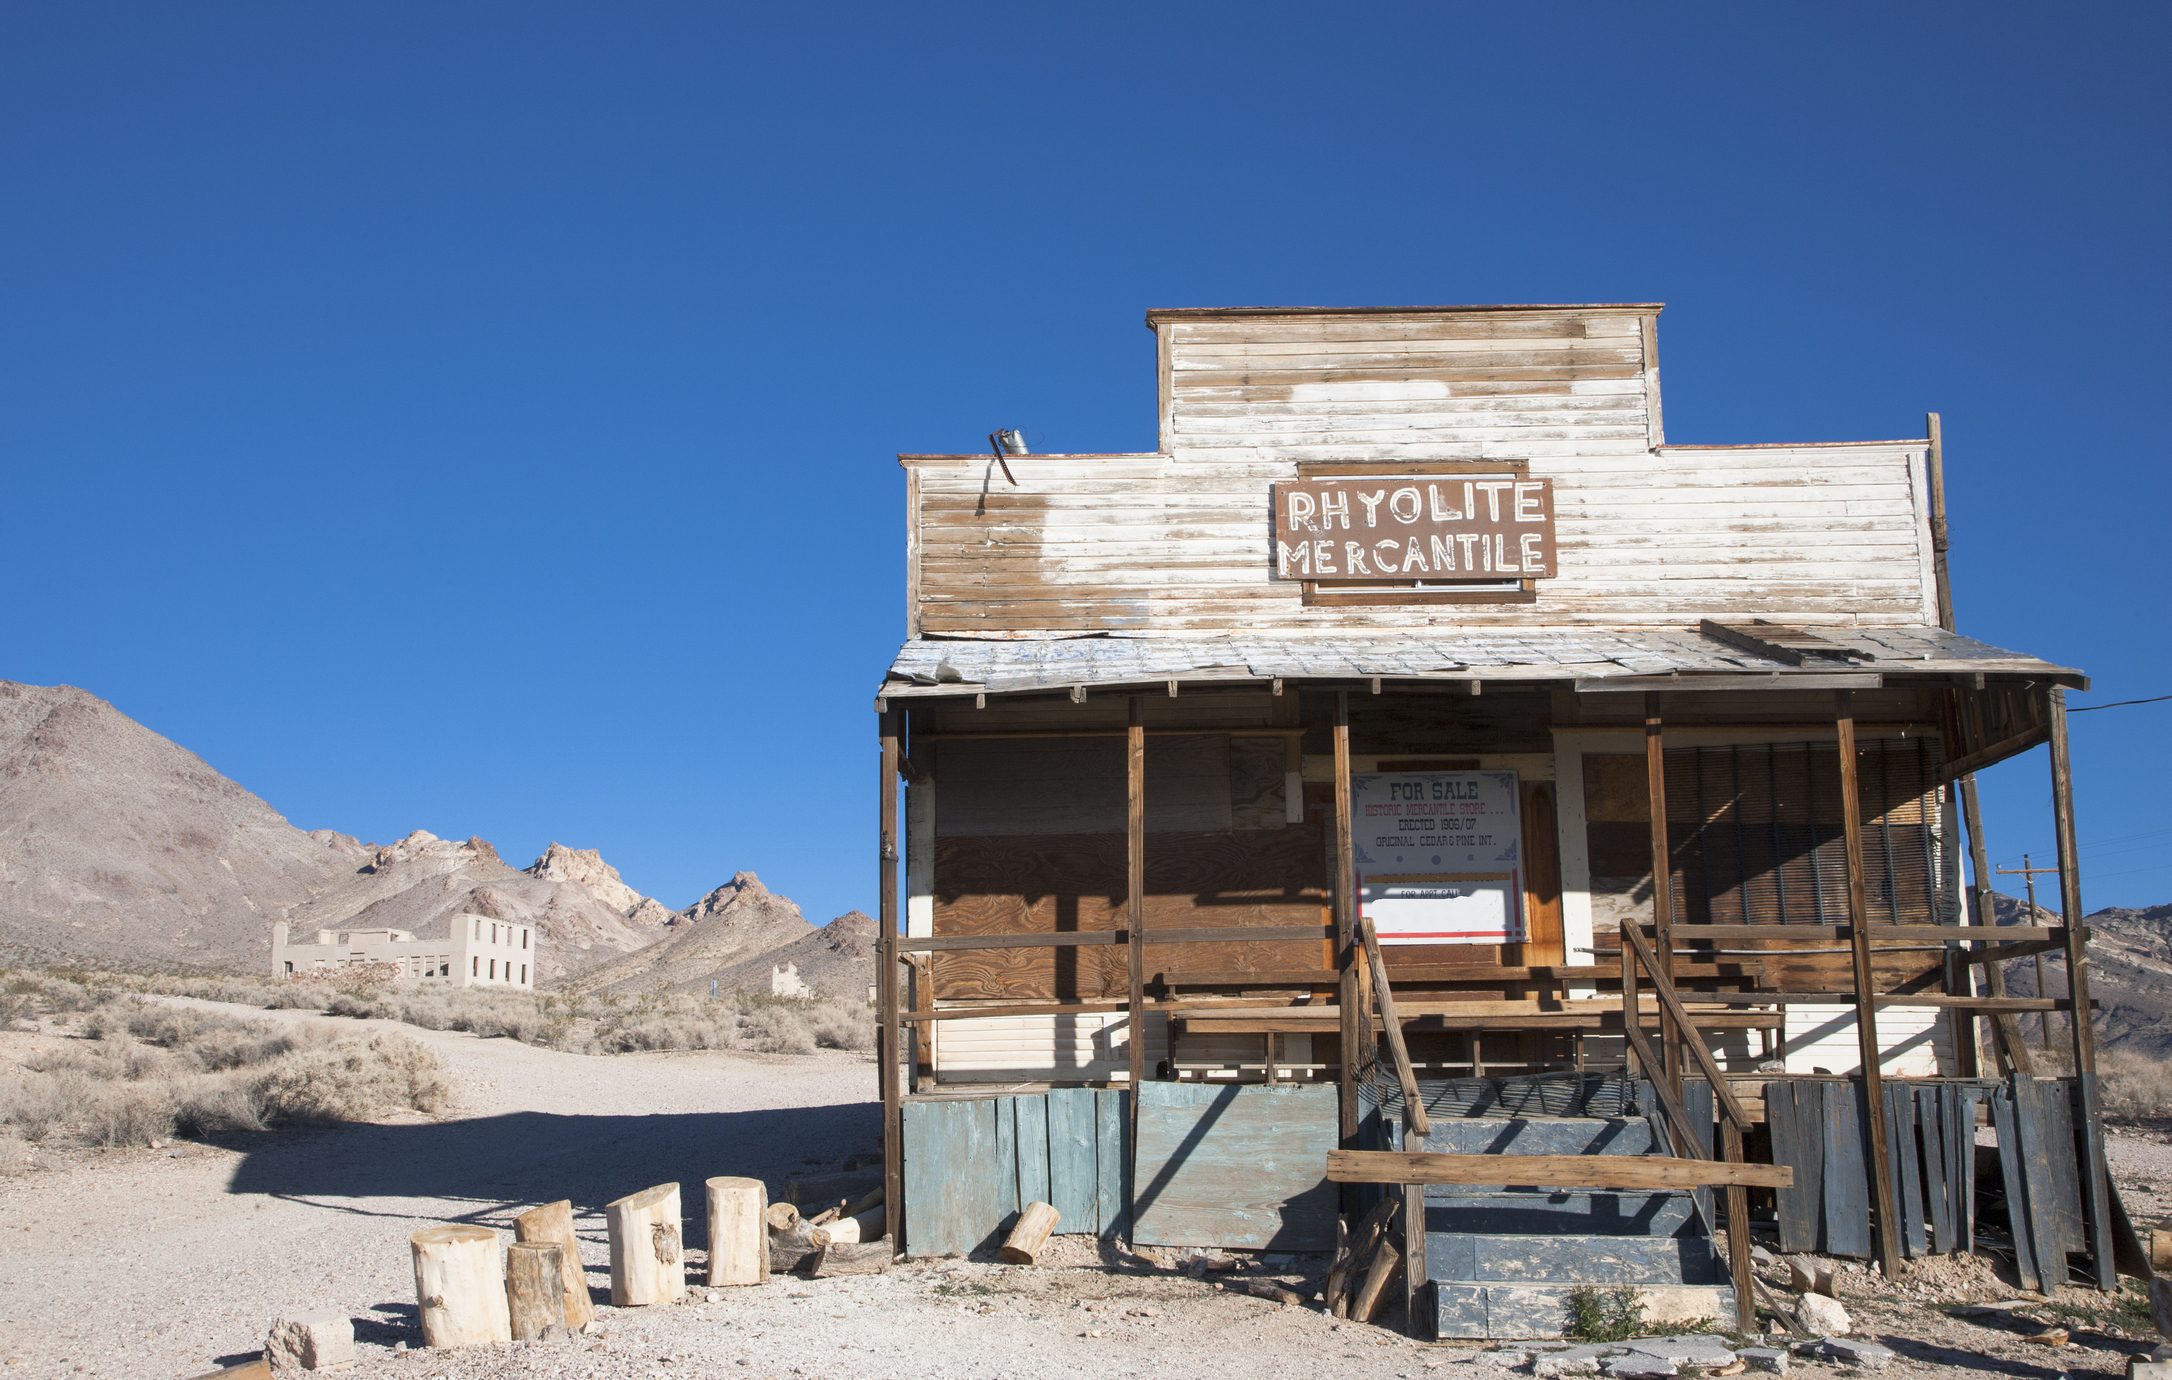 Old wooden building labeled &quot;Rhyolite Mercantile&quot; with abandoned structures in a desert background